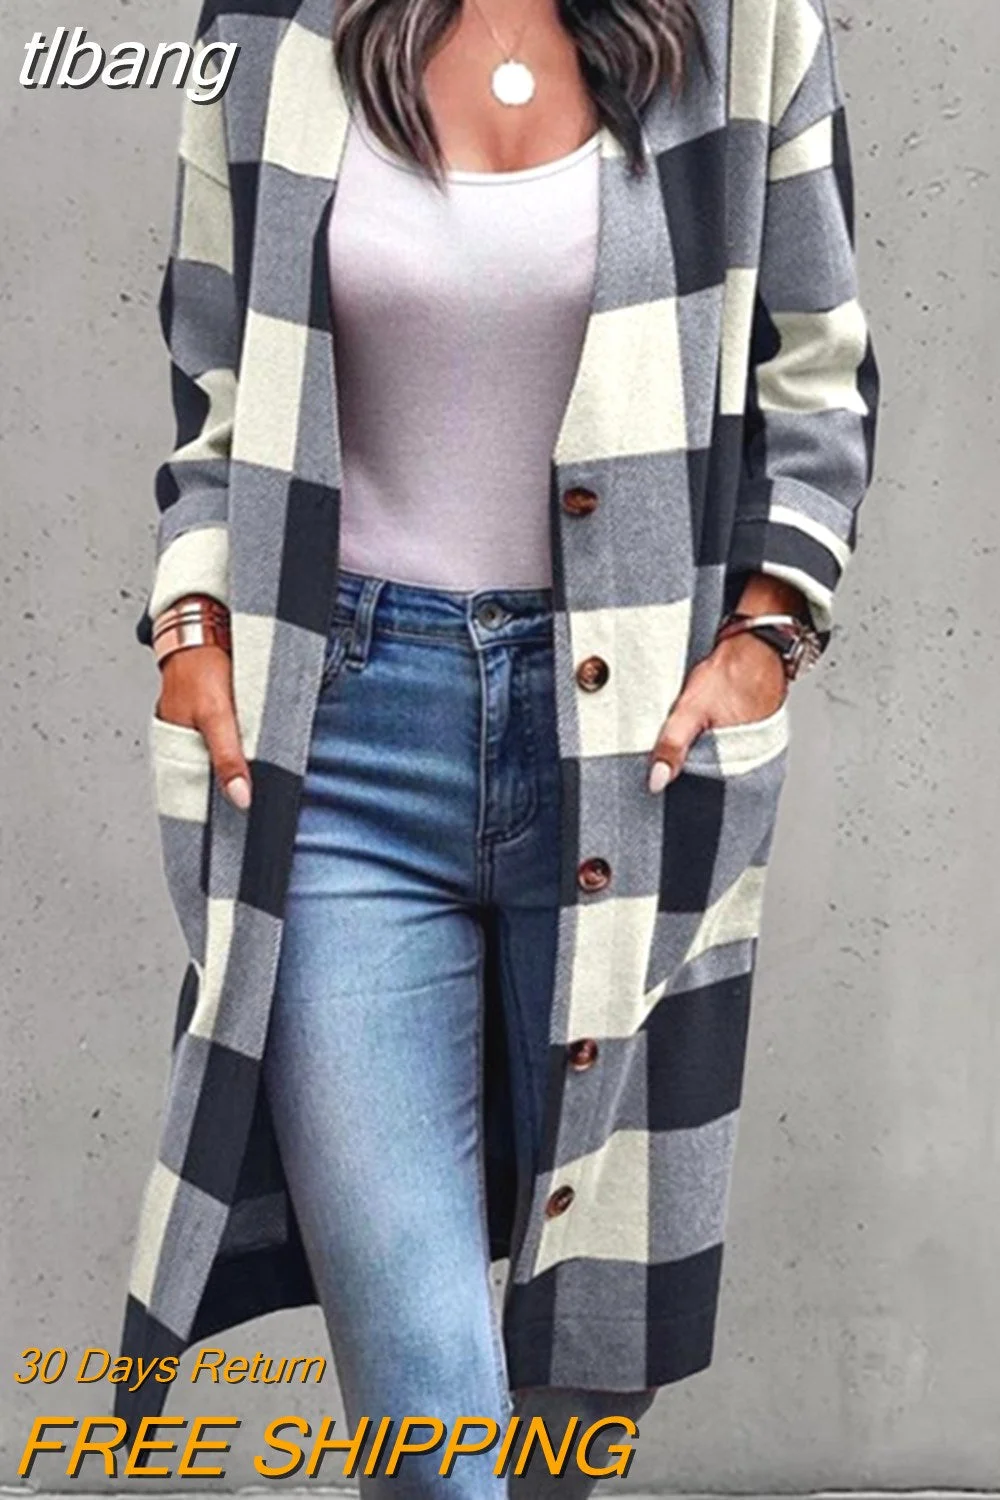 tlbang Print Pocket Detail Longline Coat Long Sleeve Casual tops elegant new ashion woman coat 2023 autumn winter spring outfits